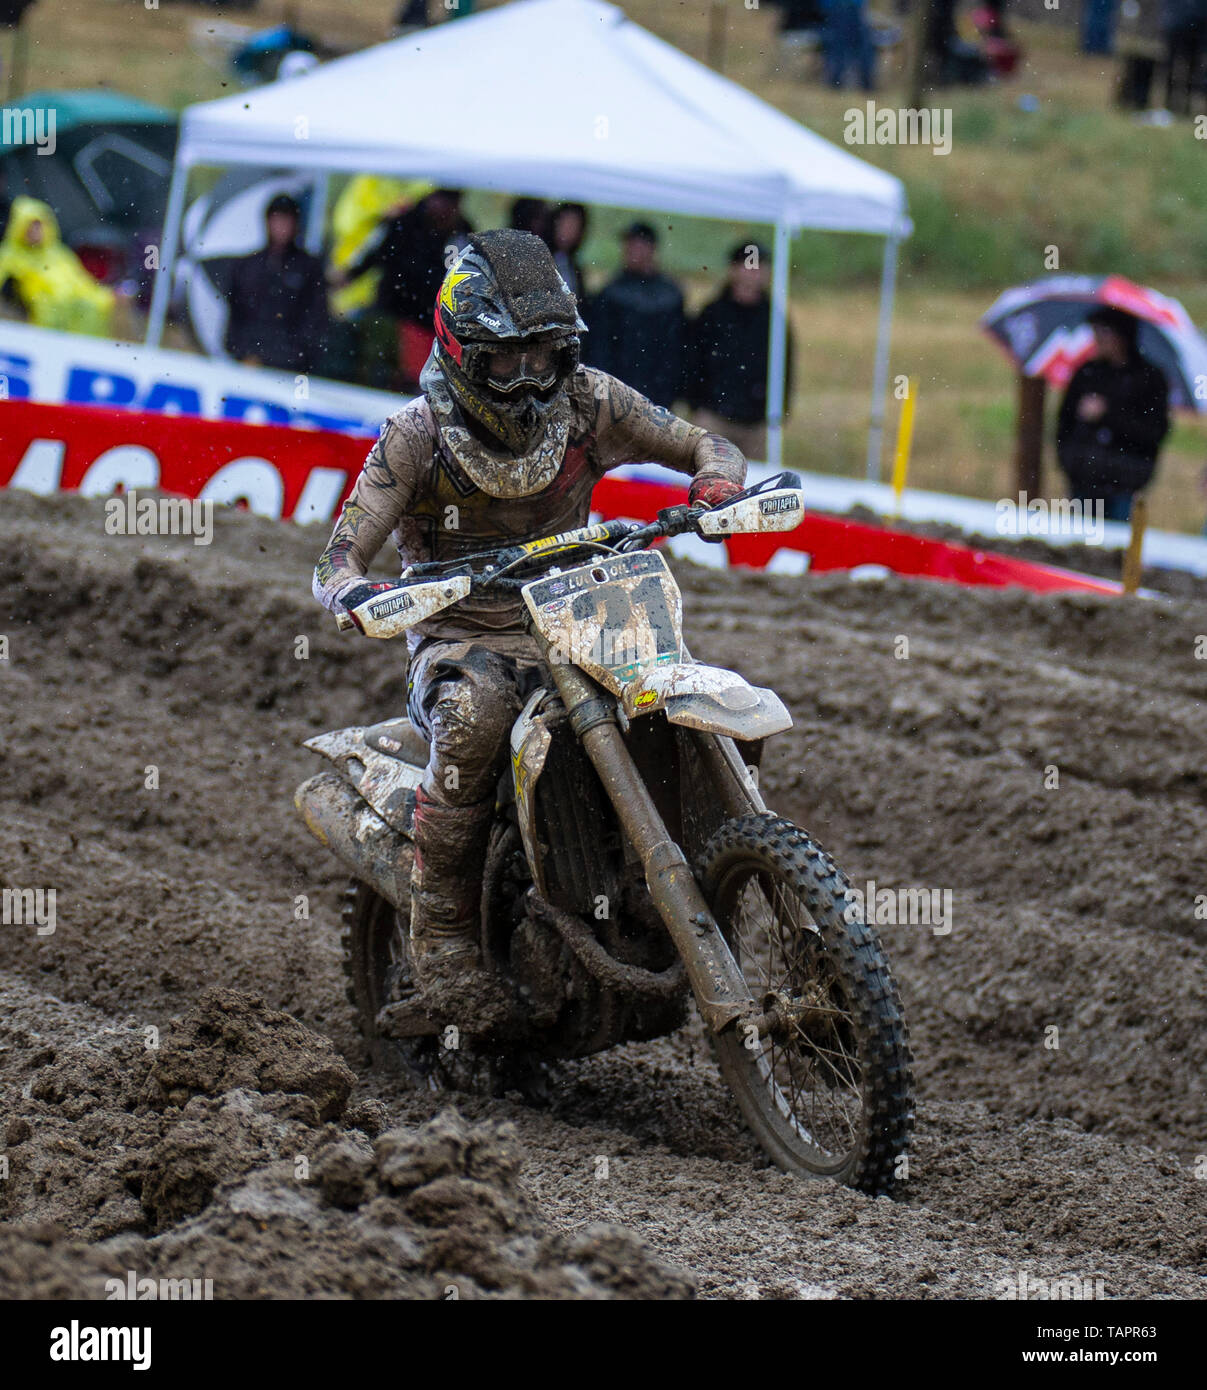 MAY 18, 2019 Rancho Cordova, CA U.S.A.: # 21 Jason Anderson coming out of turn 21 during the Lucas Oil Pro Motocross 450 Championship at Hangtown Motocross Classic Rancho Cordova, CA Thurman James / CSM Stock Photo